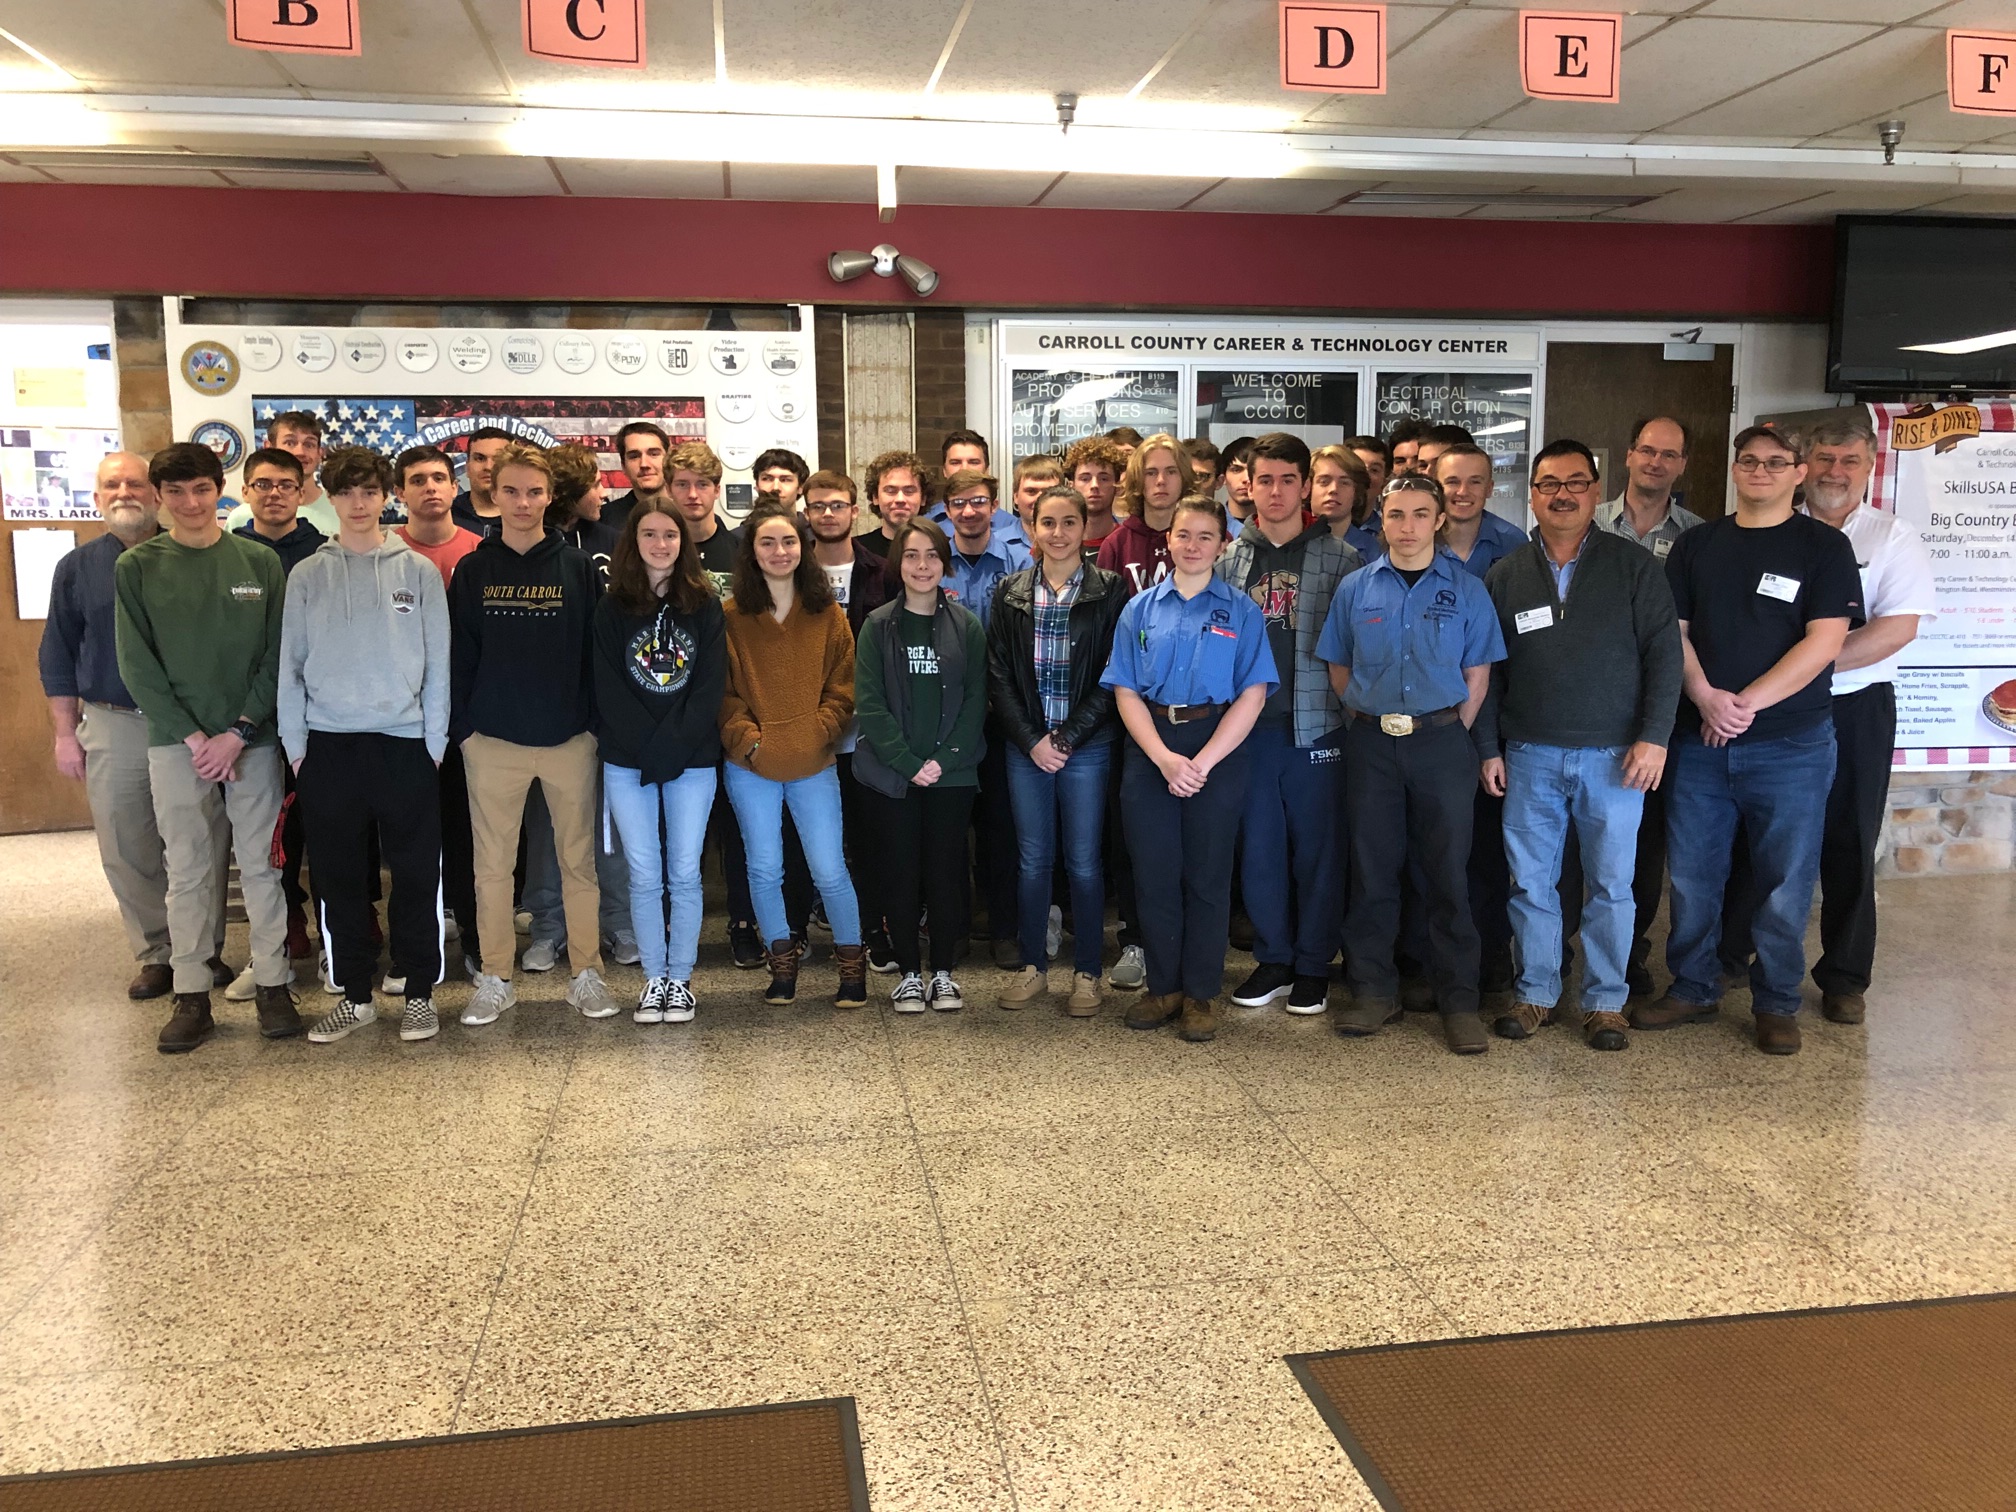 APL’s Hunter Turco (second from right), Erich Schulze (third from right) and Joseph Walters (fourth from right) join Tim Blizzard (far right) and his class at the Carroll County Career and Technology Center for a group photo.